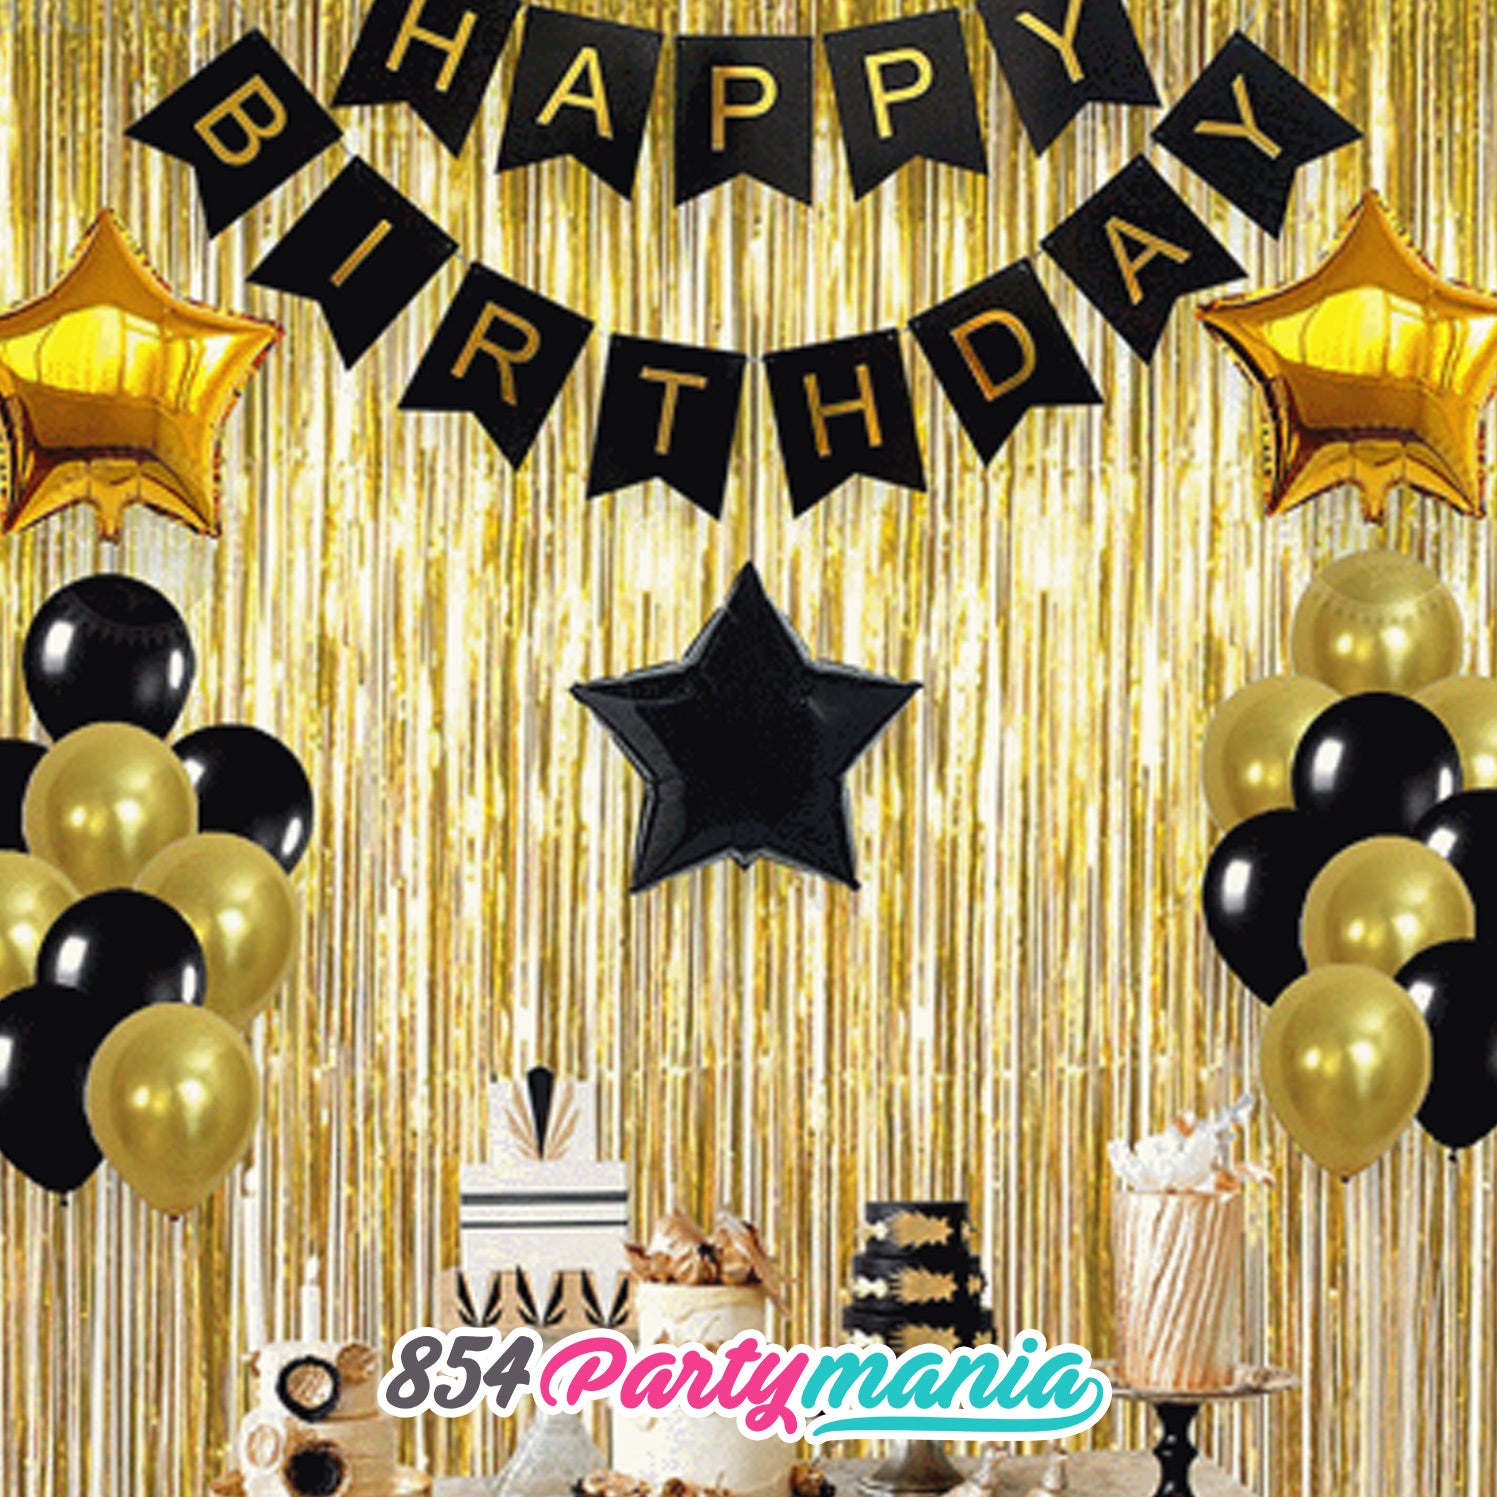 Happy Birthday Banner with Gold Print (12pcs min) – 854Partymania